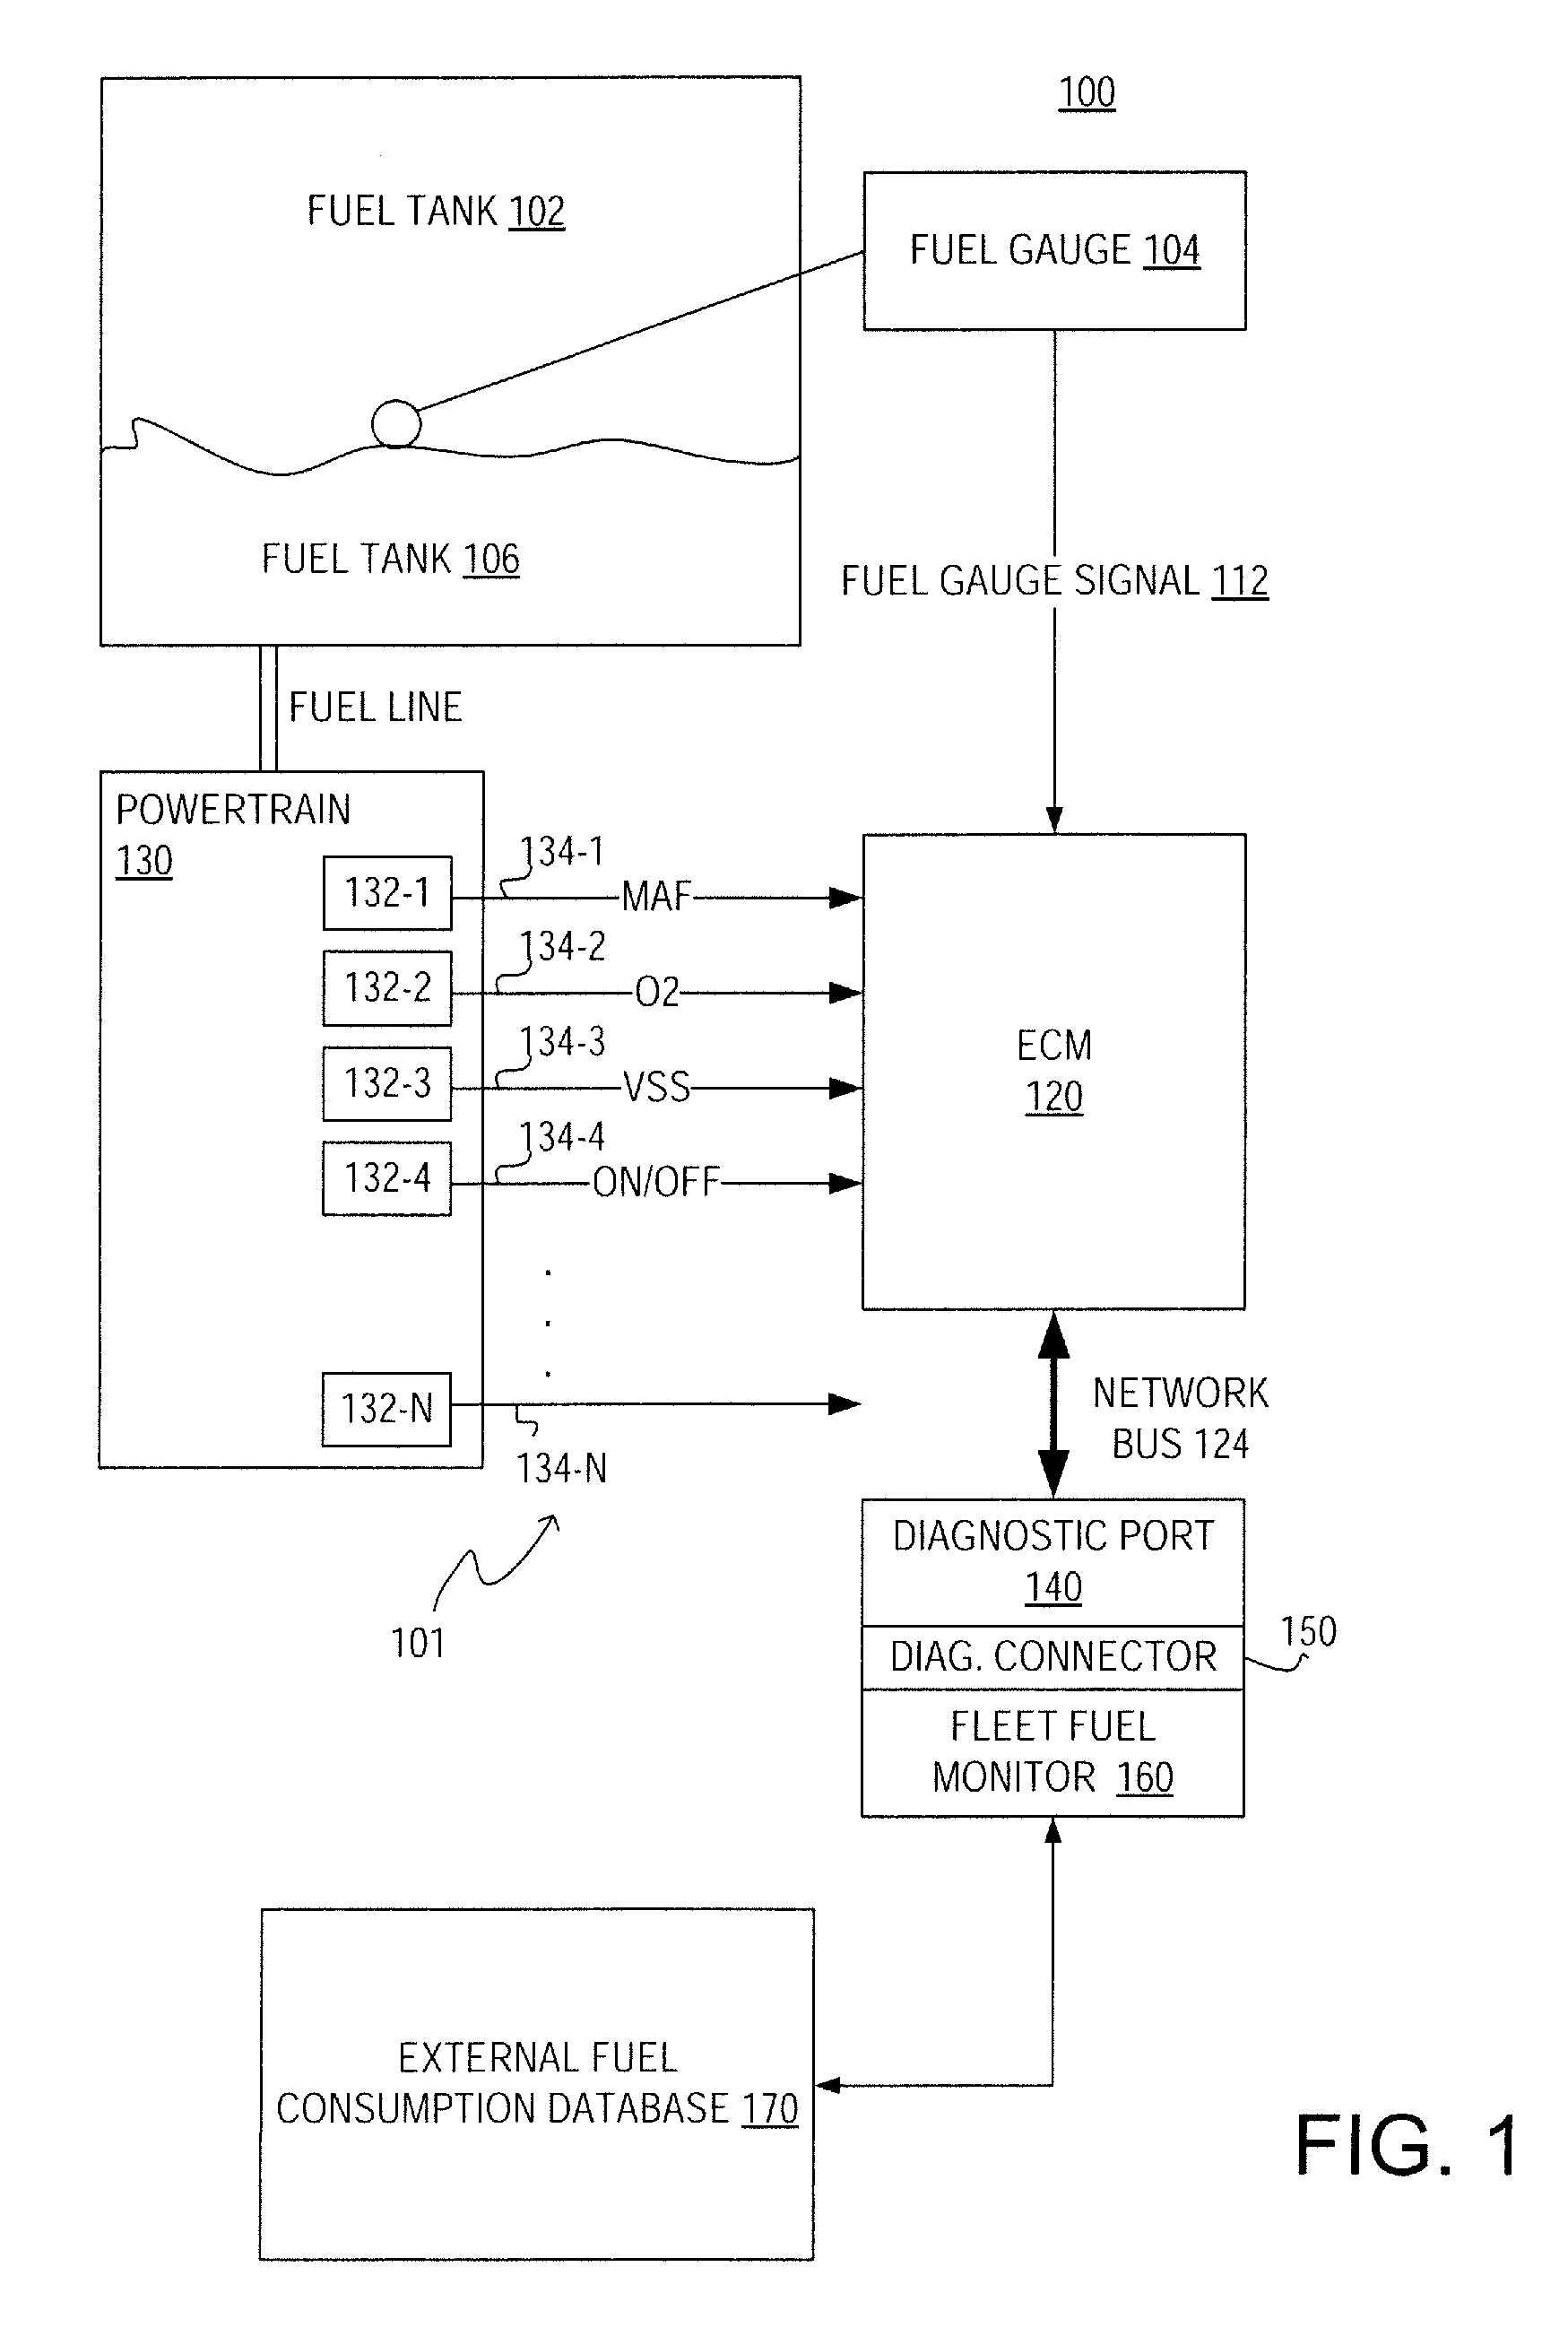 Fuel monitoring device, system, and method